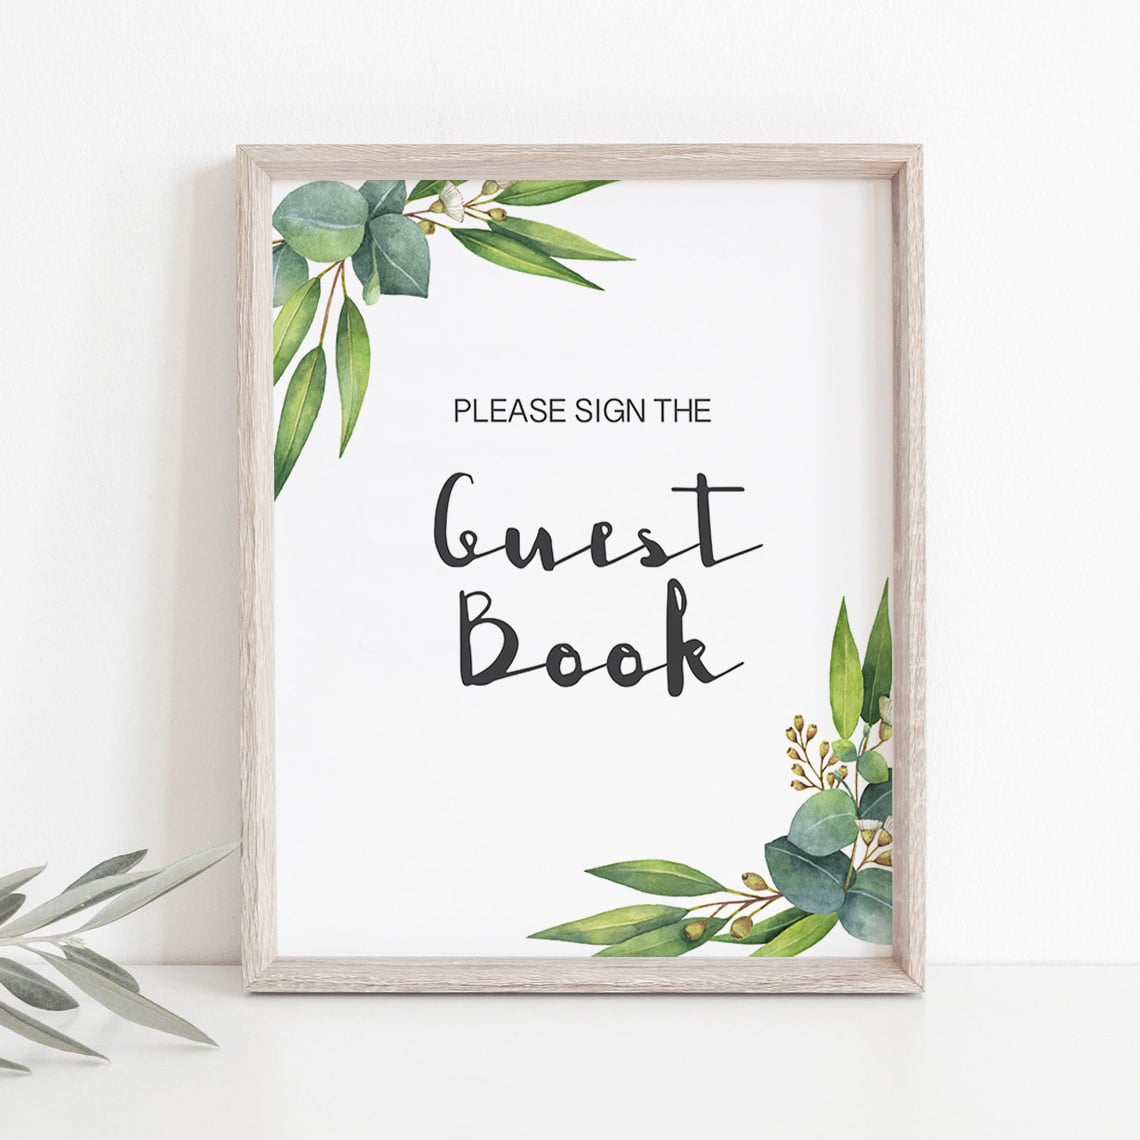 Please sign our guestbook wedding sign greenery by LittleSizzle